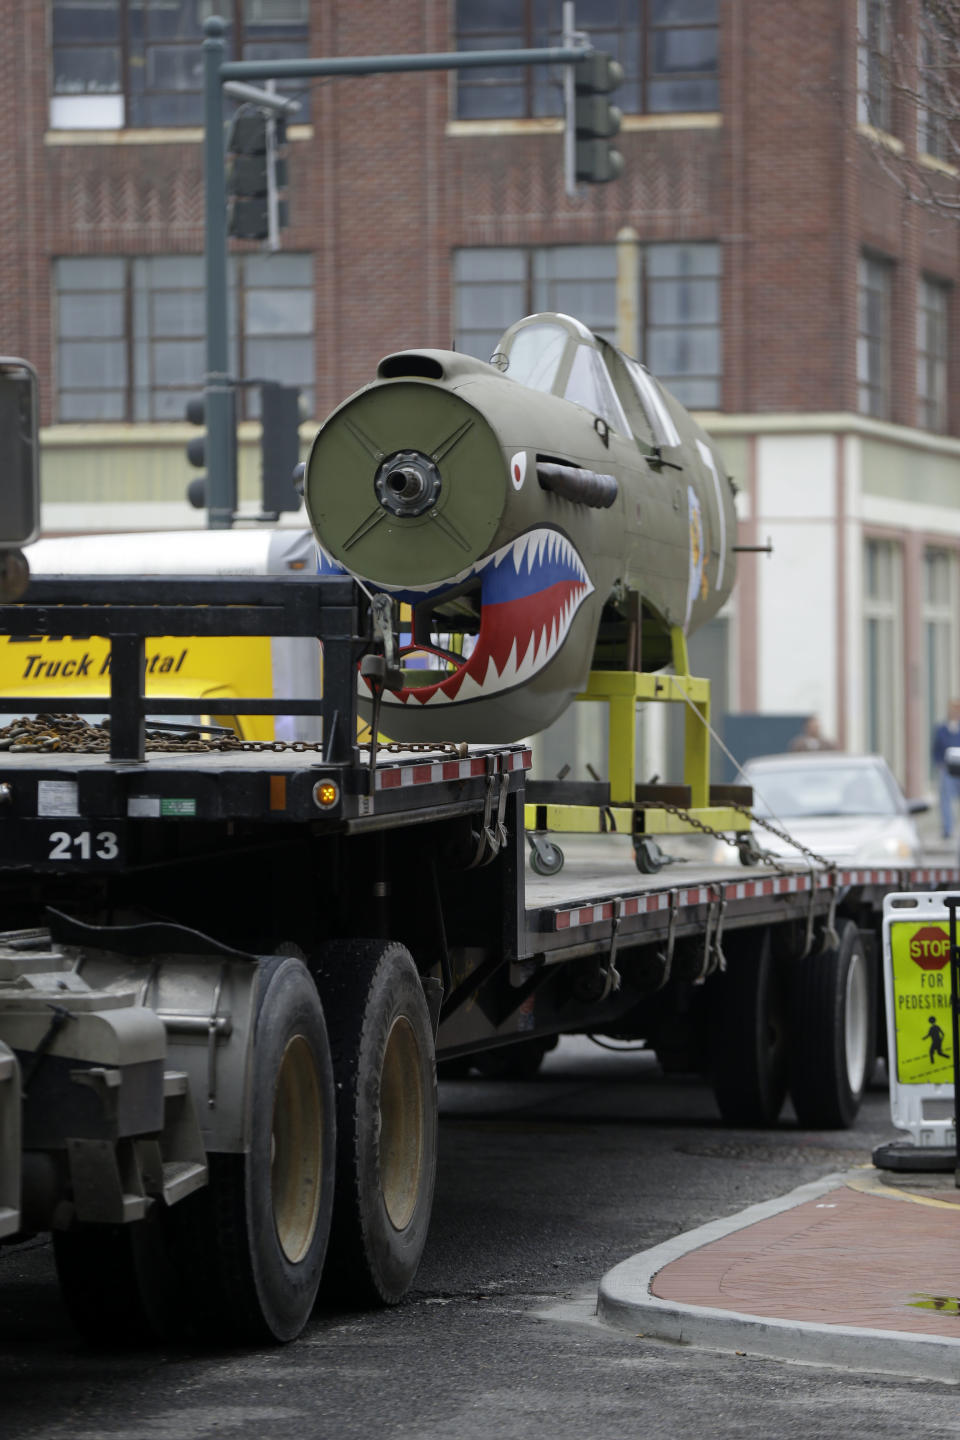 A restored P-40 Curtiss Warhawk fighter plane, one of only 32 known remaining in the world, arrives on a flatbed truck for permanent display at the National World War II Museum in New Orleans, Monday, Feb. 3, 2014. The plane, painted in the scheme of the famed Flying Tigers, will be displayed in the museum’s new pavilion, Campaigns of Courage: European and Pacific Theaters. (AP Photo/Gerald Herbert)